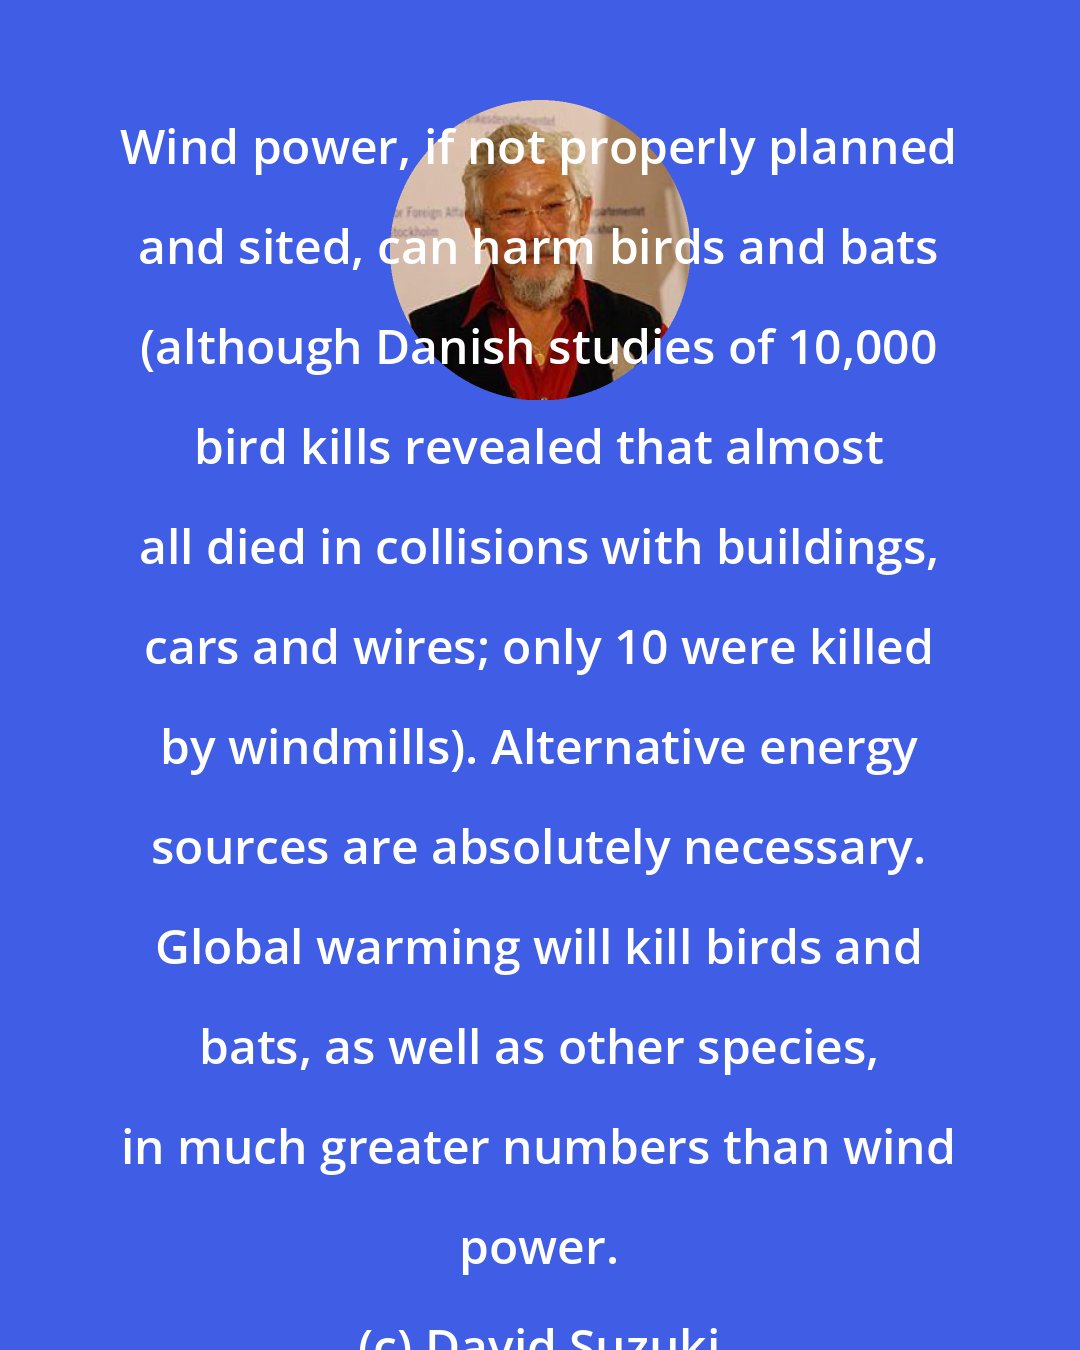 David Suzuki: Wind power, if not properly planned and sited, can harm birds and bats (although Danish studies of 10,000 bird kills revealed that almost all died in collisions with buildings, cars and wires; only 10 were killed by windmills). Alternative energy sources are absolutely necessary. Global warming will kill birds and bats, as well as other species, in much greater numbers than wind power.